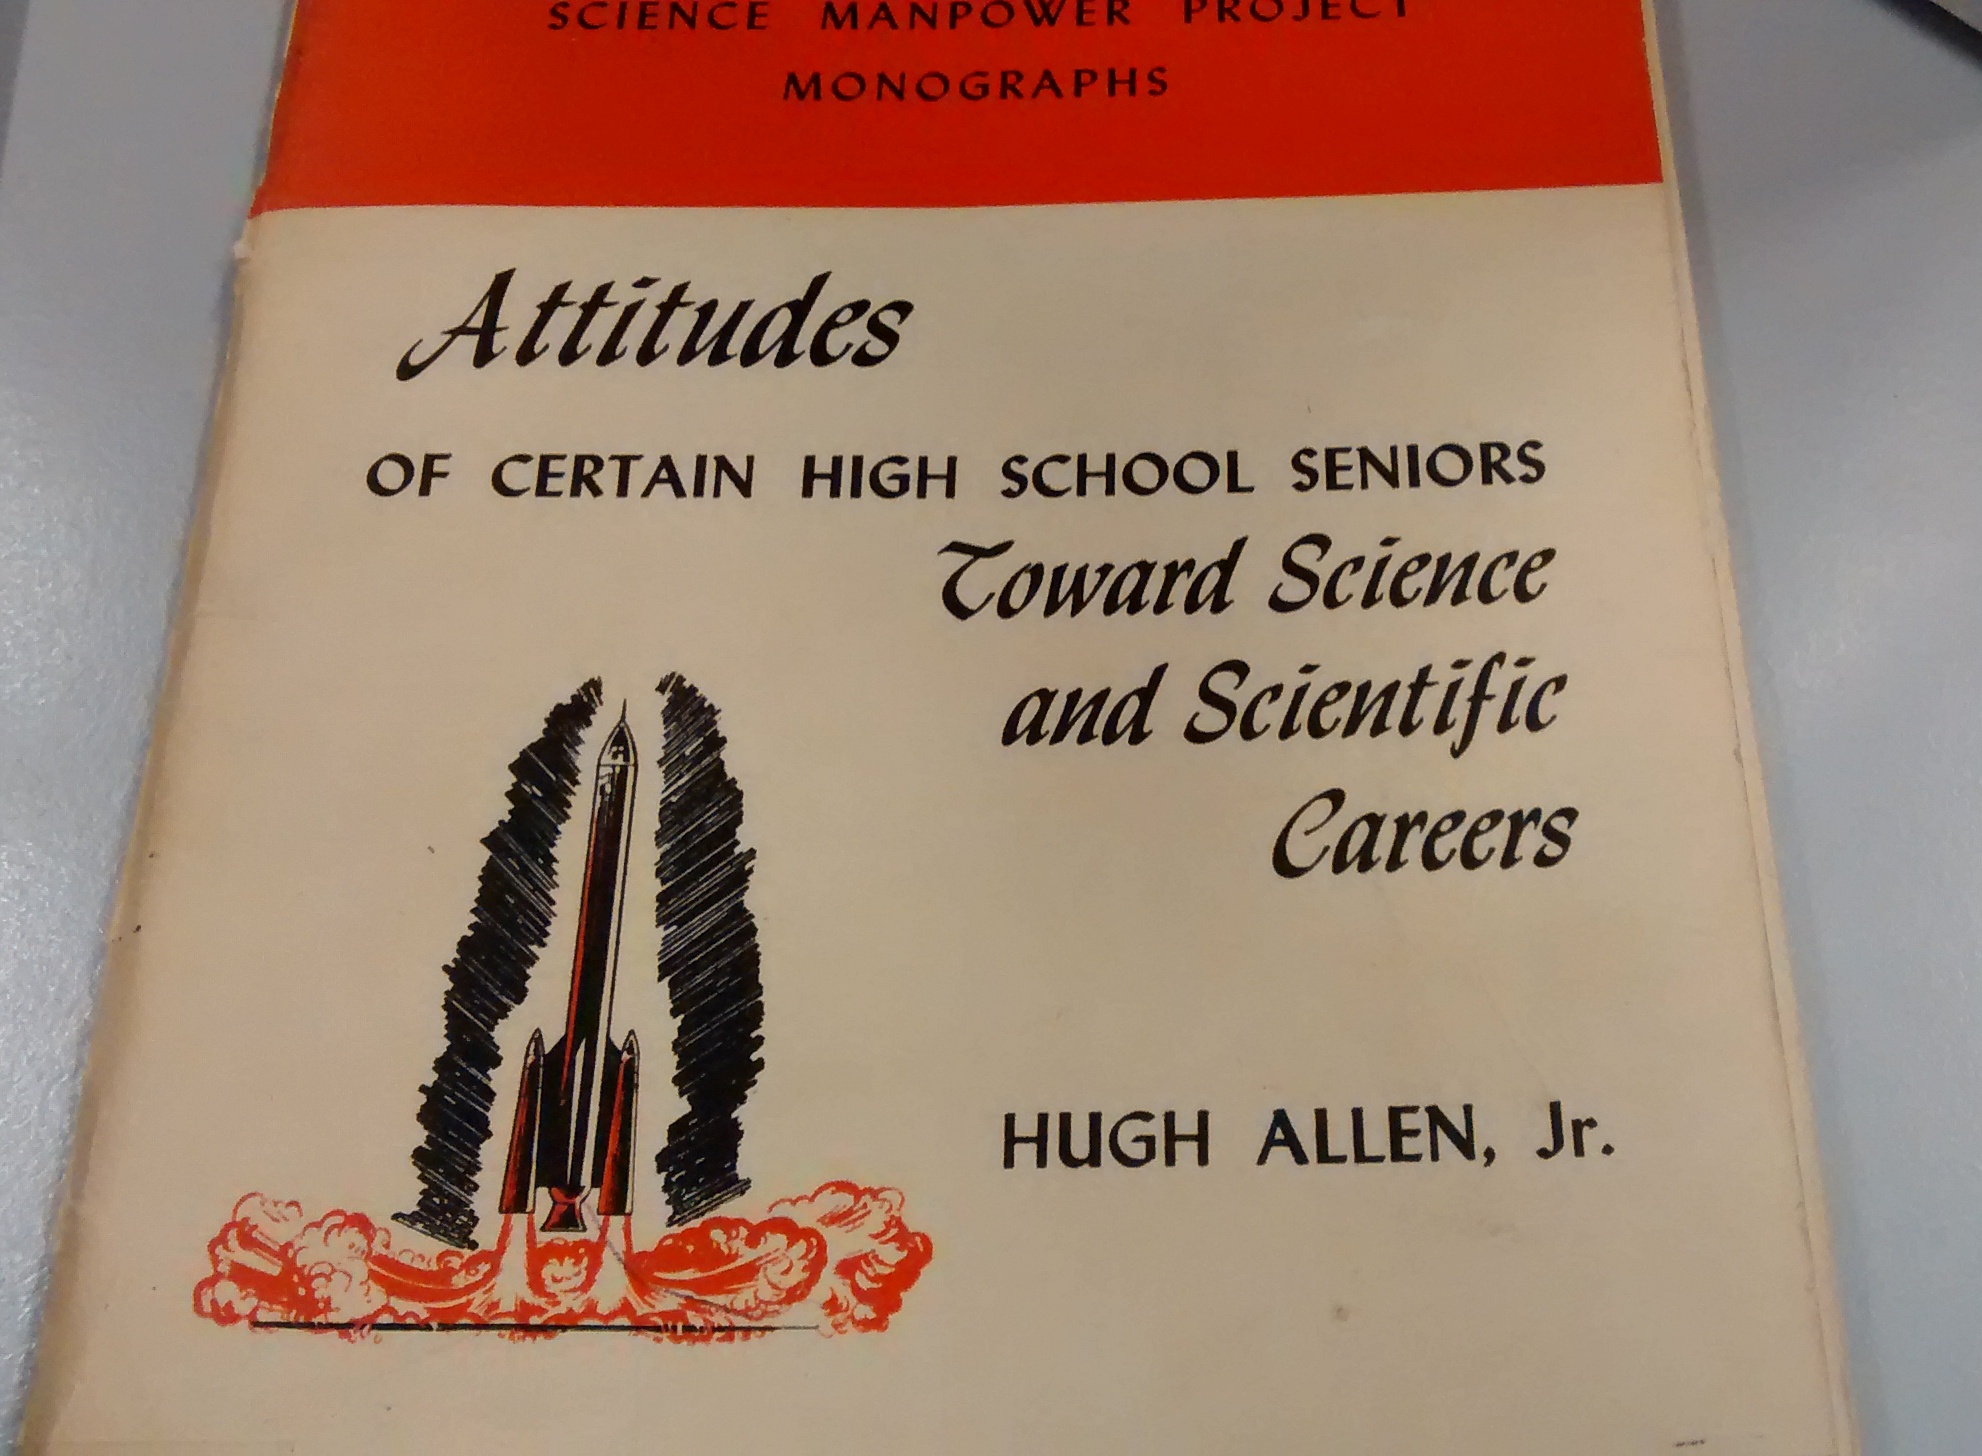 Education resource from 1959.